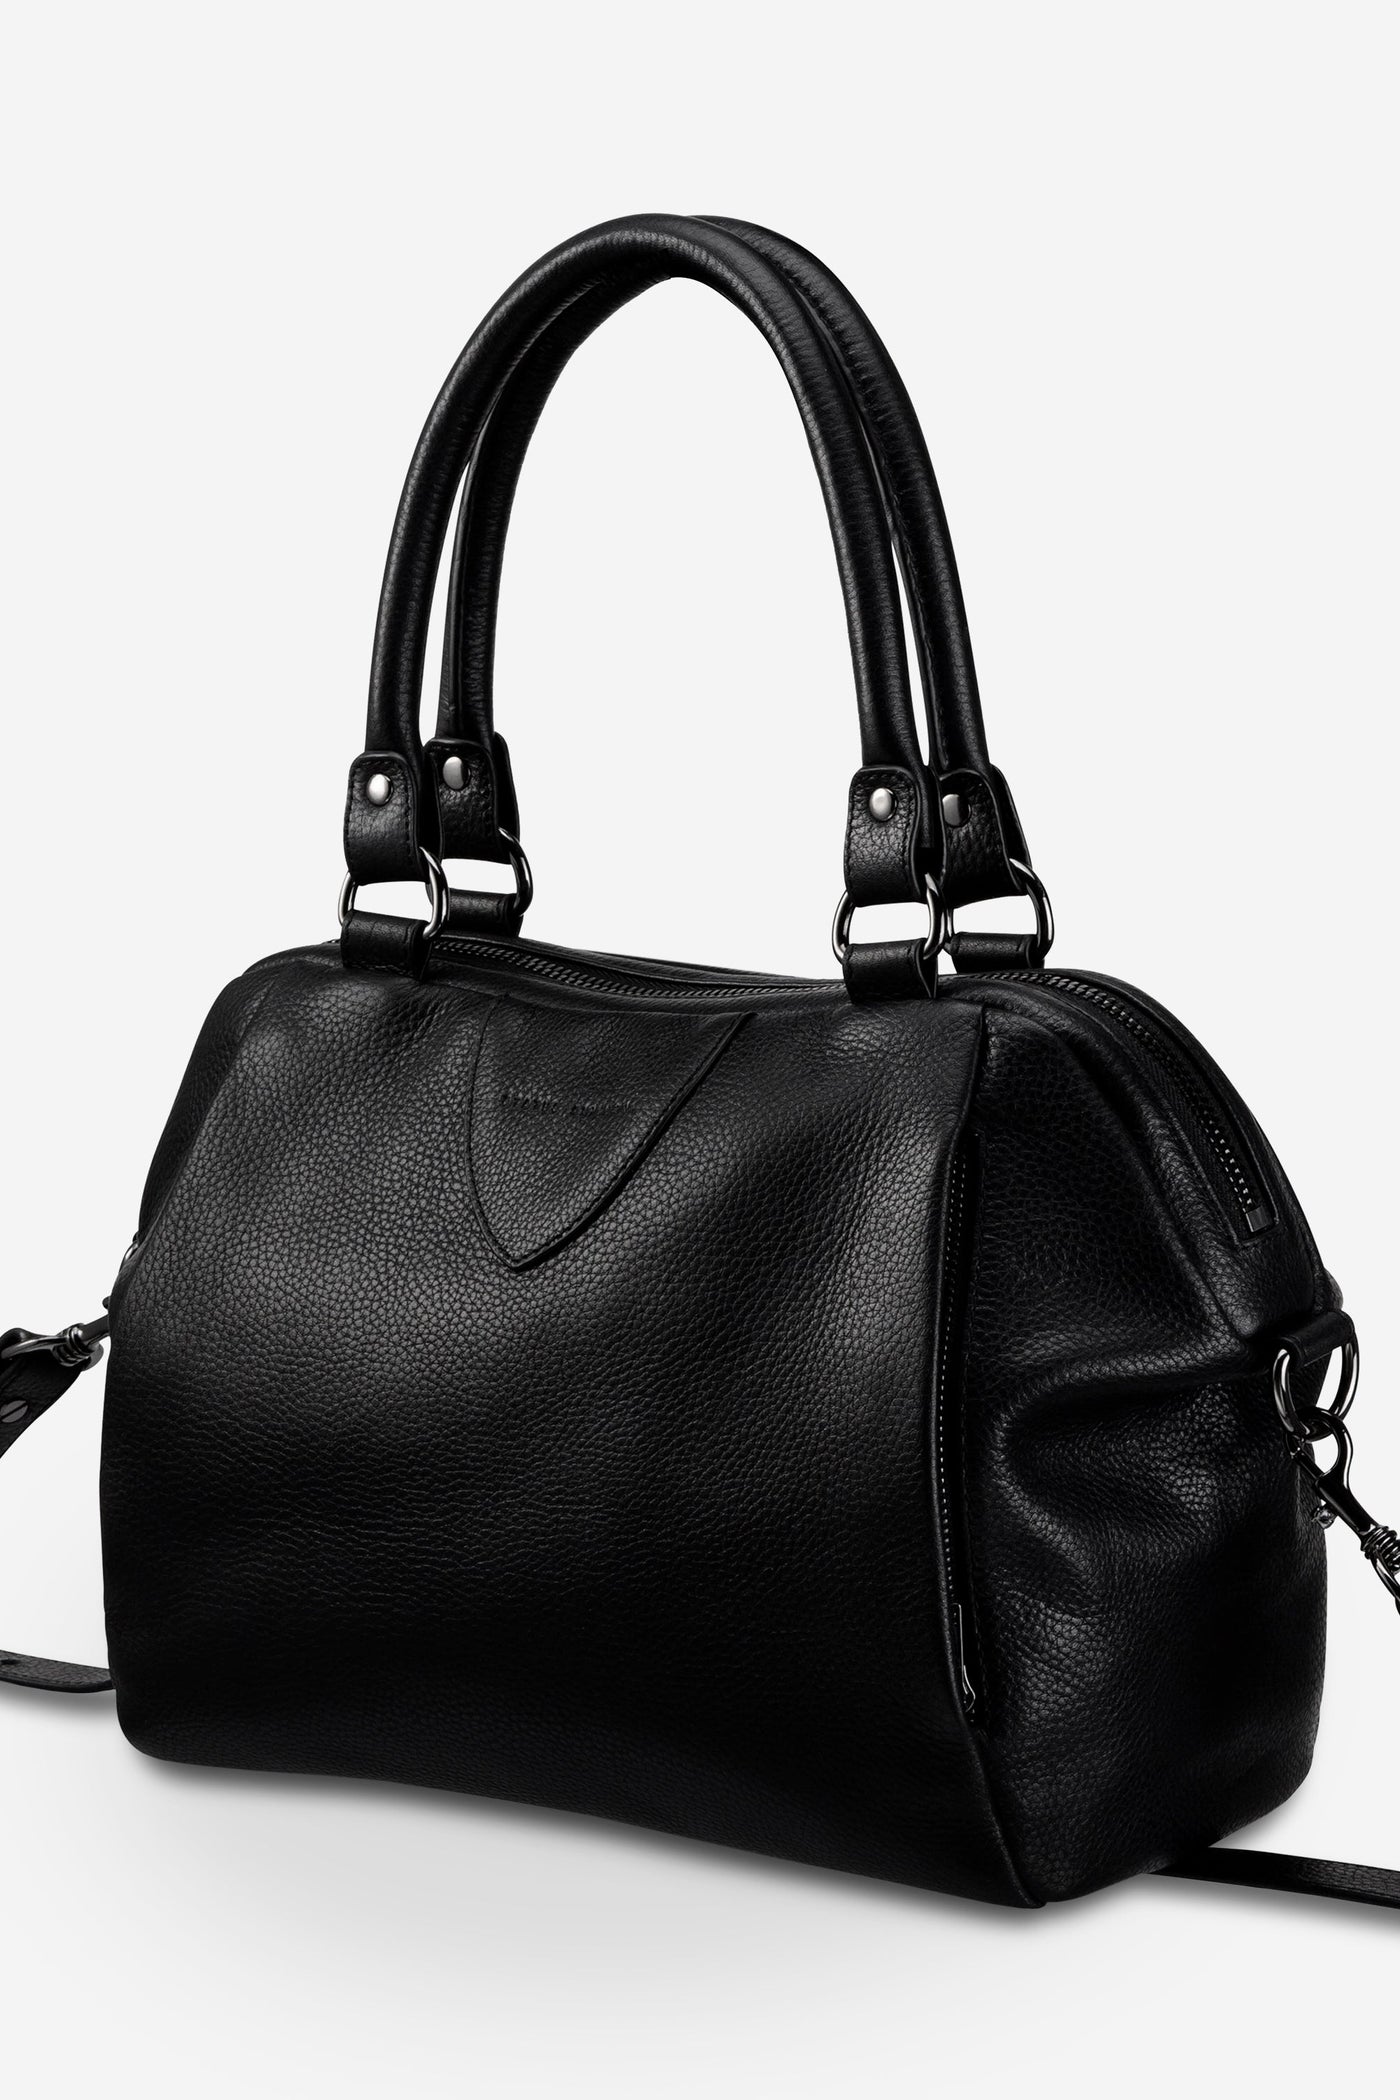 Status Anxiety Force of Being Bag - Black